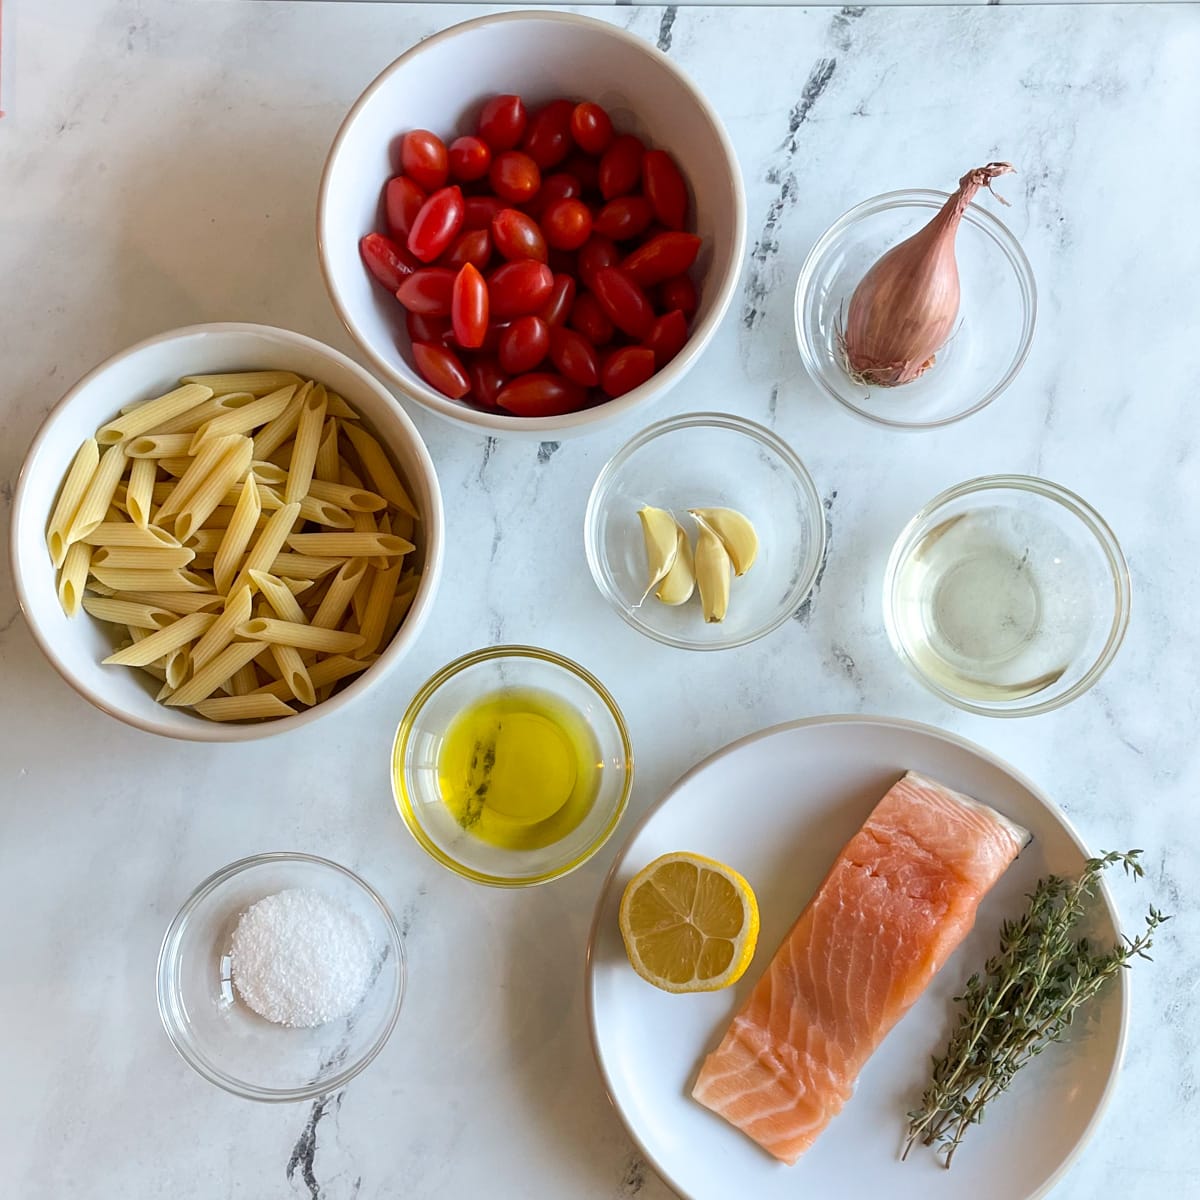 The ingredients for Penne al Salmone are shown on a white marble counter.